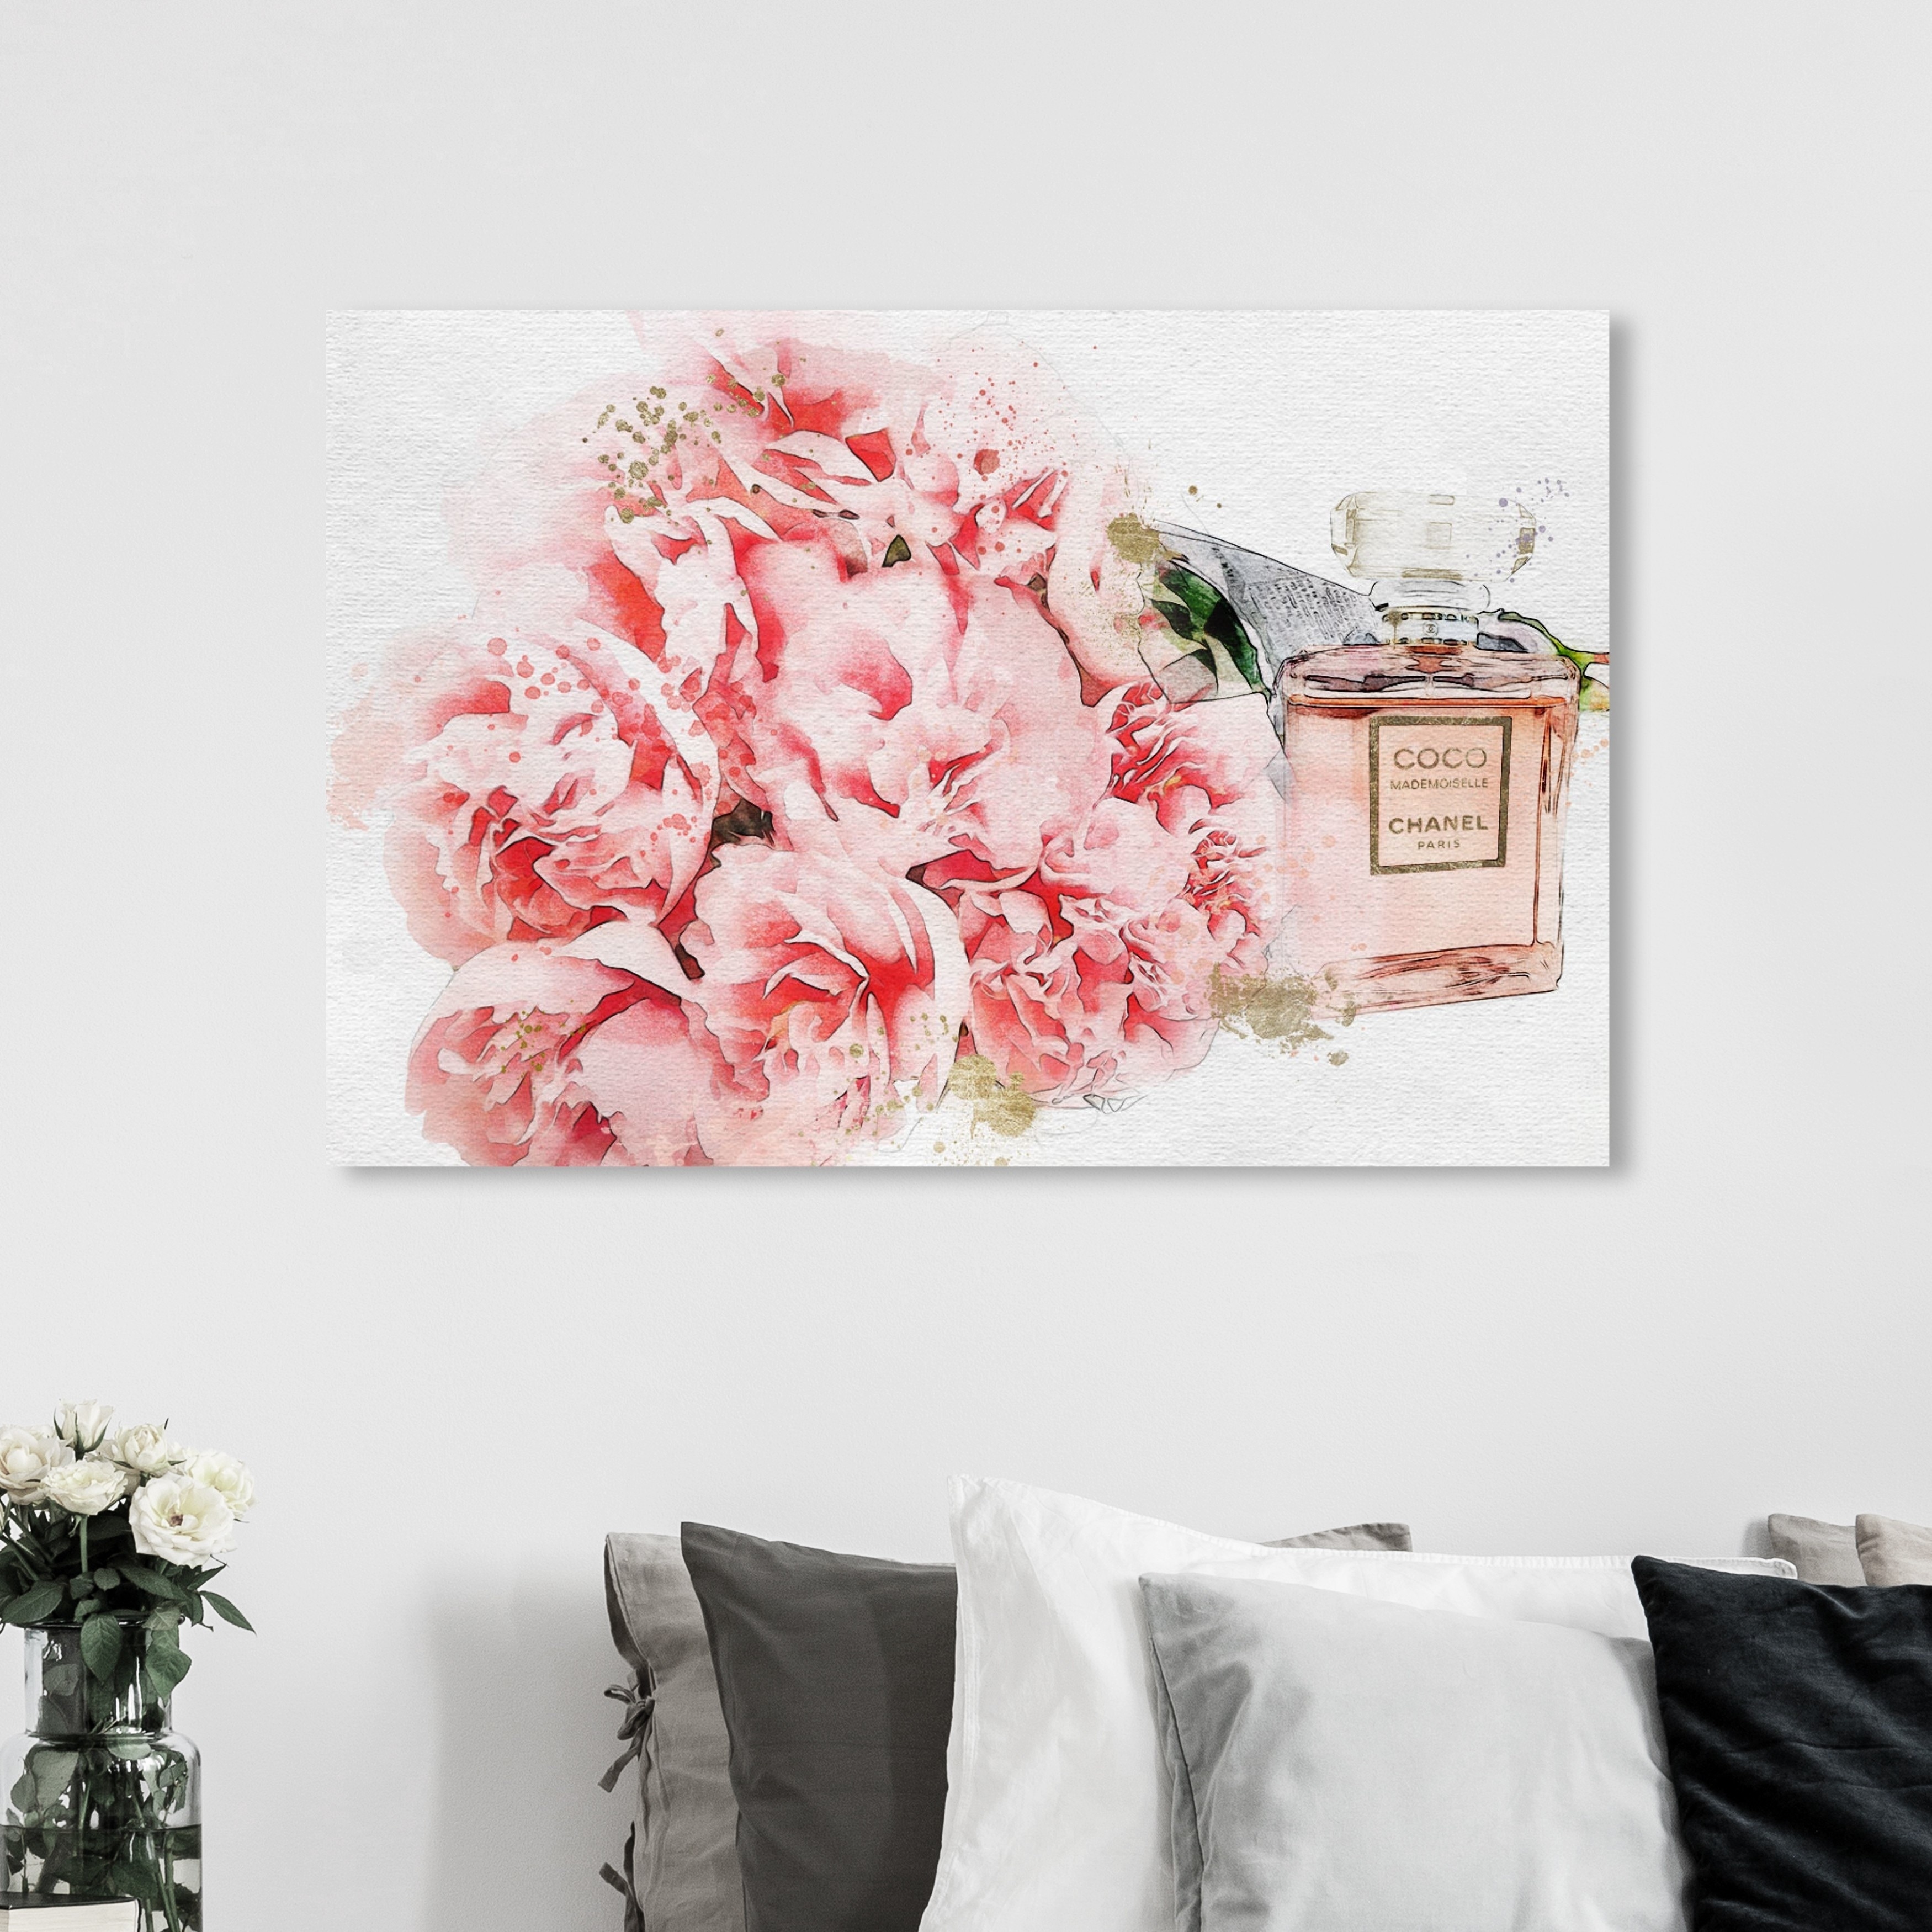 Oliver Gal Fashion and Glam Wall Art Canvas Prints 'Pinkish Glamour'  Perfumes - White, Pink - On Sale - Bed Bath & Beyond - 30765230